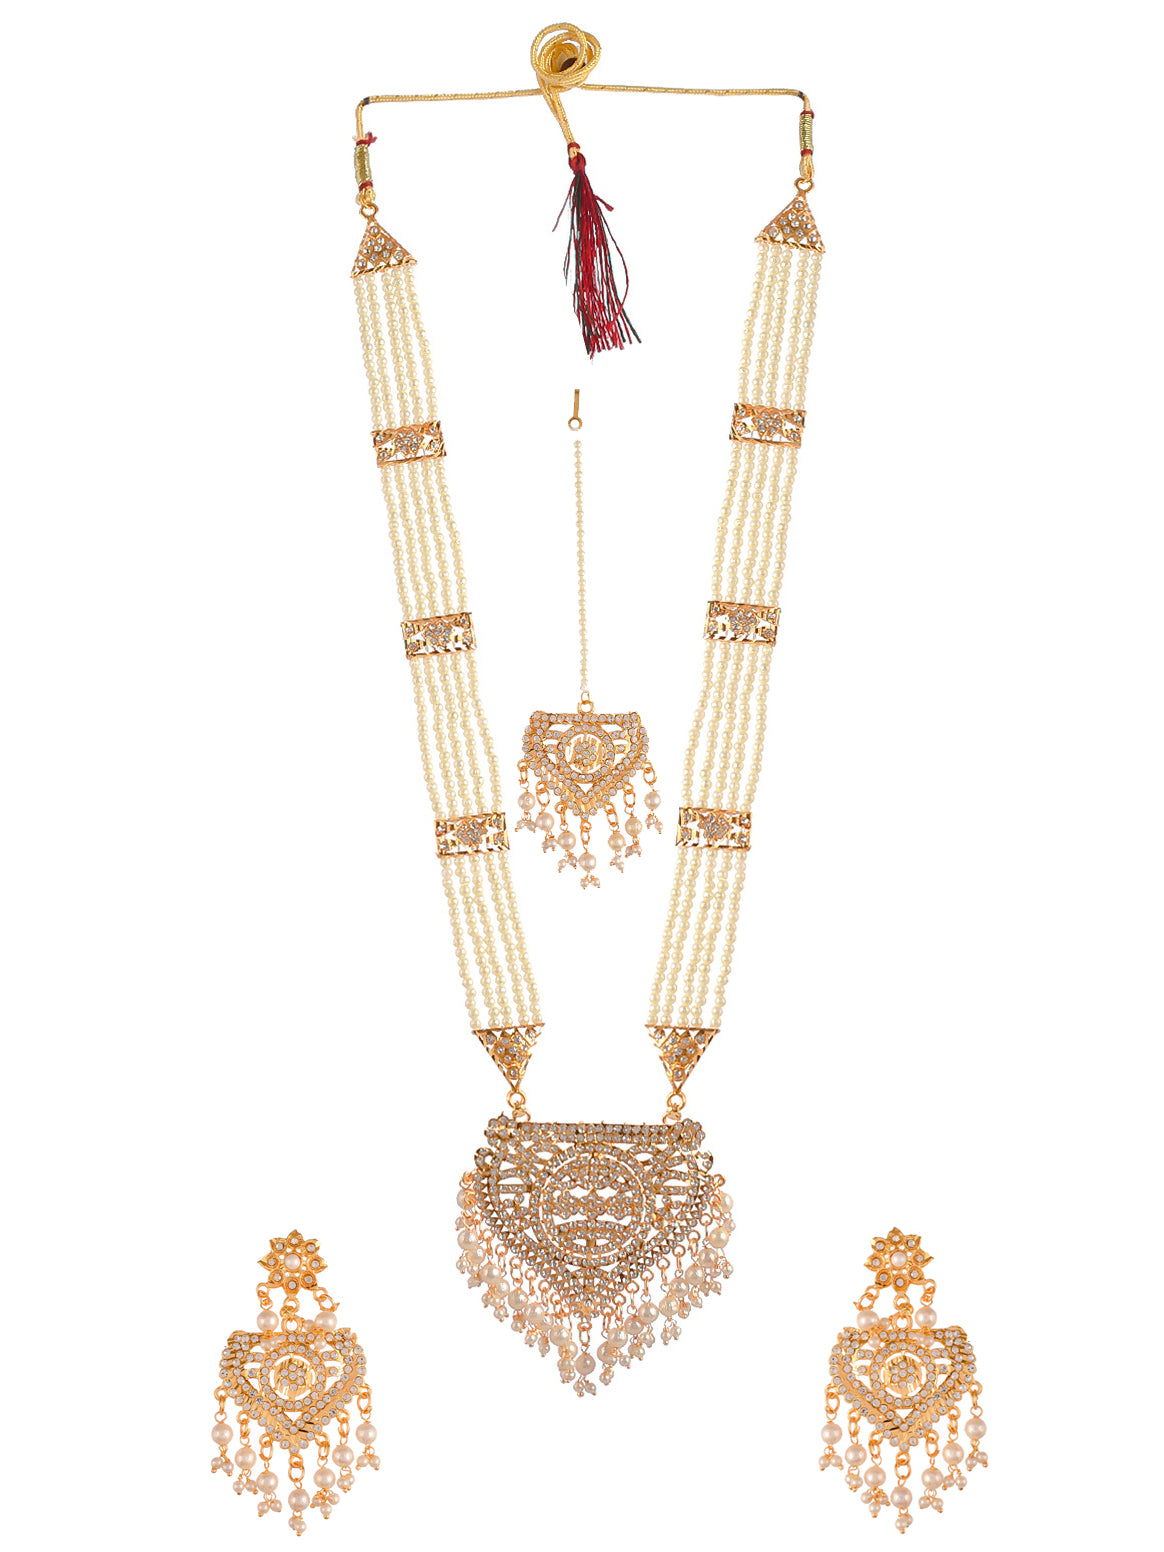 Gold and Pearl Bridal Necklace Set with Matching Earrings